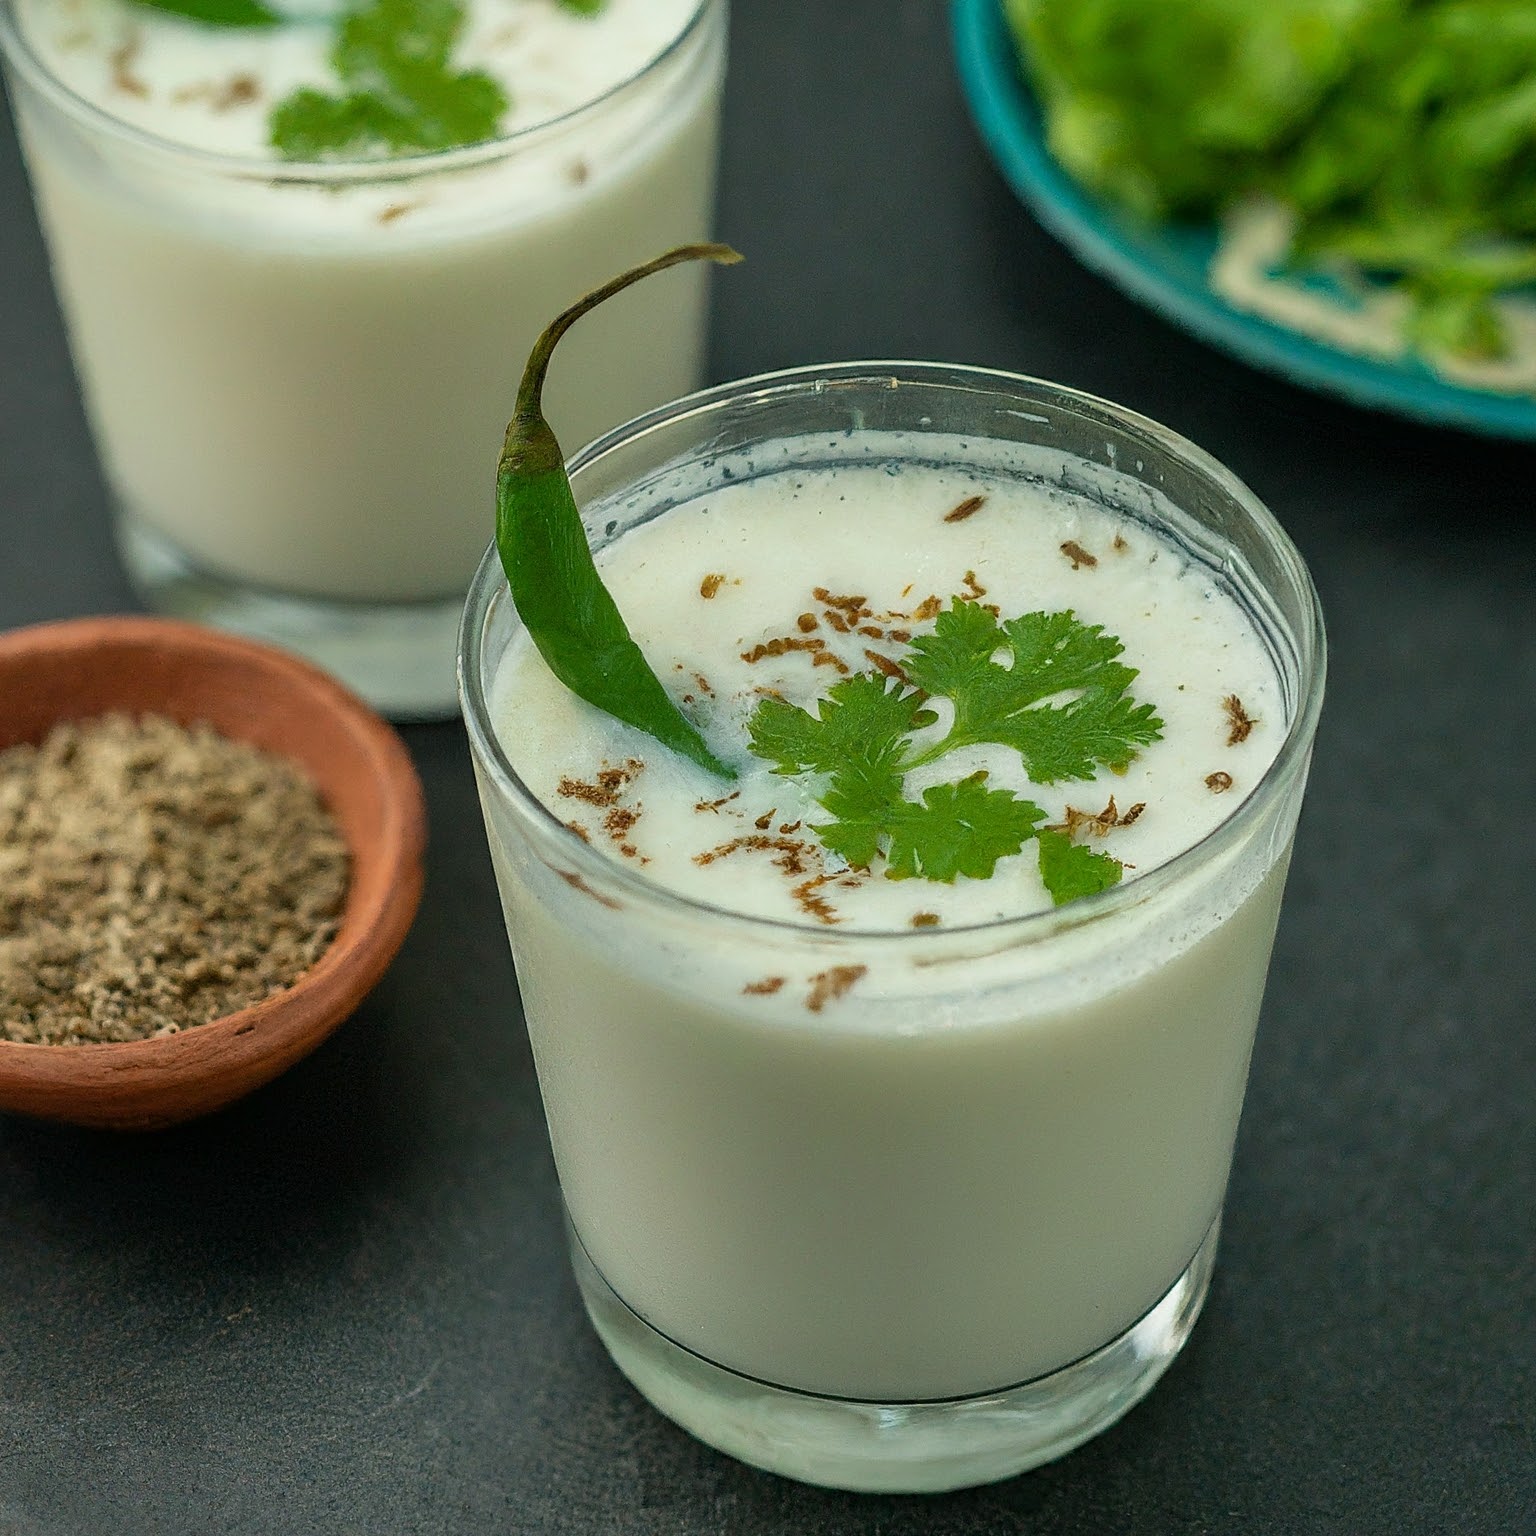 A tall glass of frothy buttermilk drink garnished with coriander leaves and a green chilli slice.